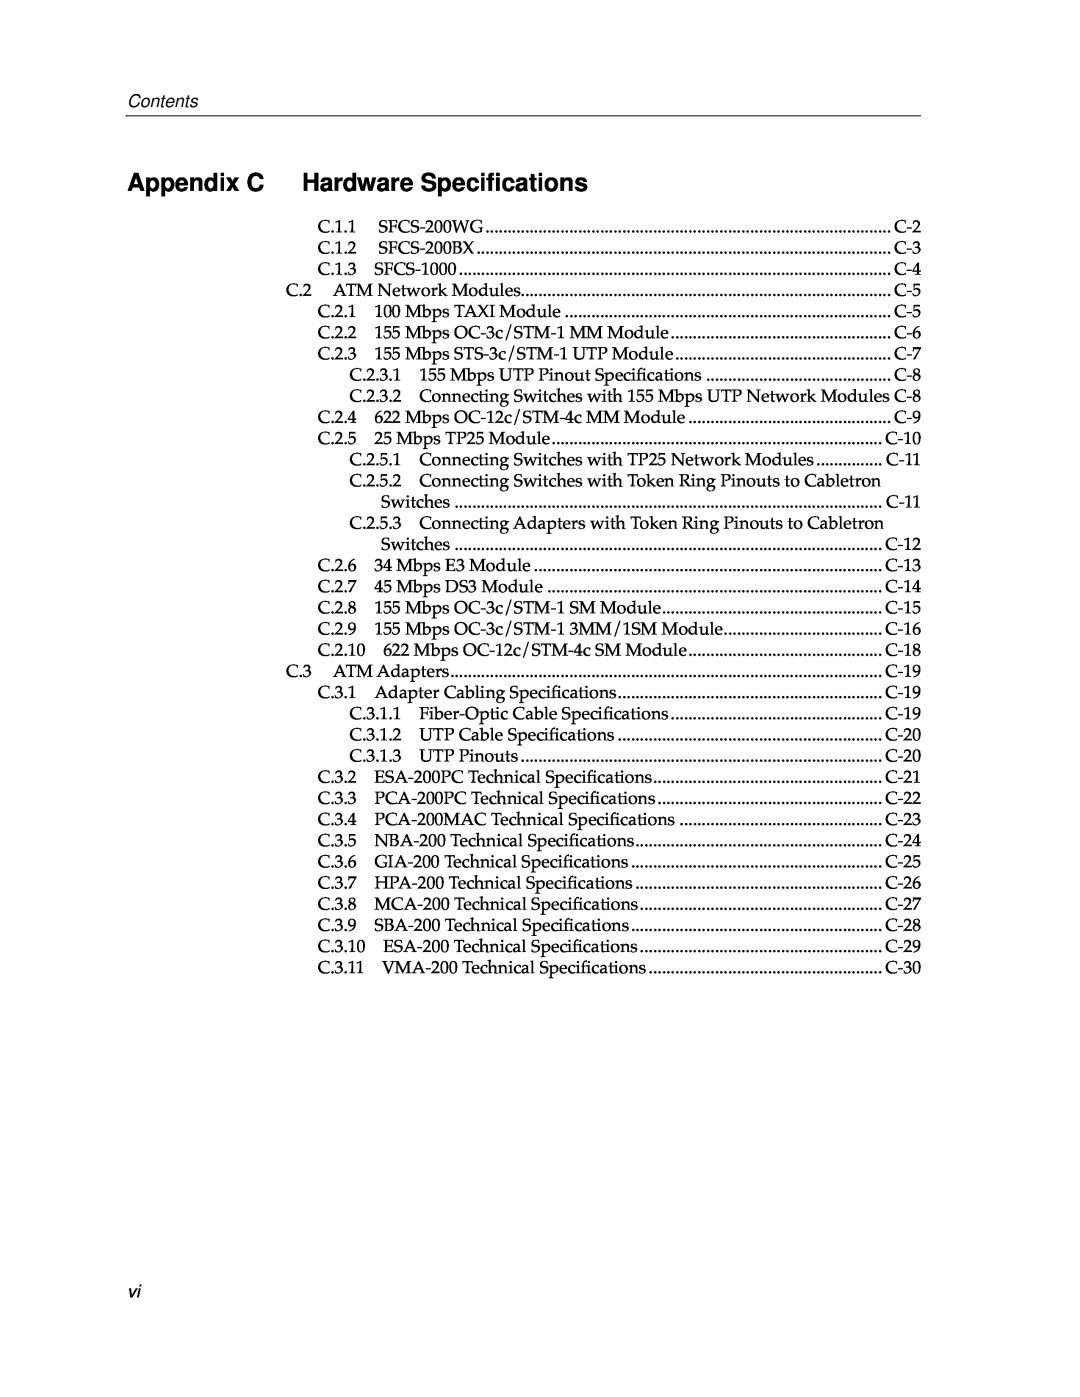 Cabletron Systems 9A000 manual Appendix C, Hardware Speciﬁcations, Contents 